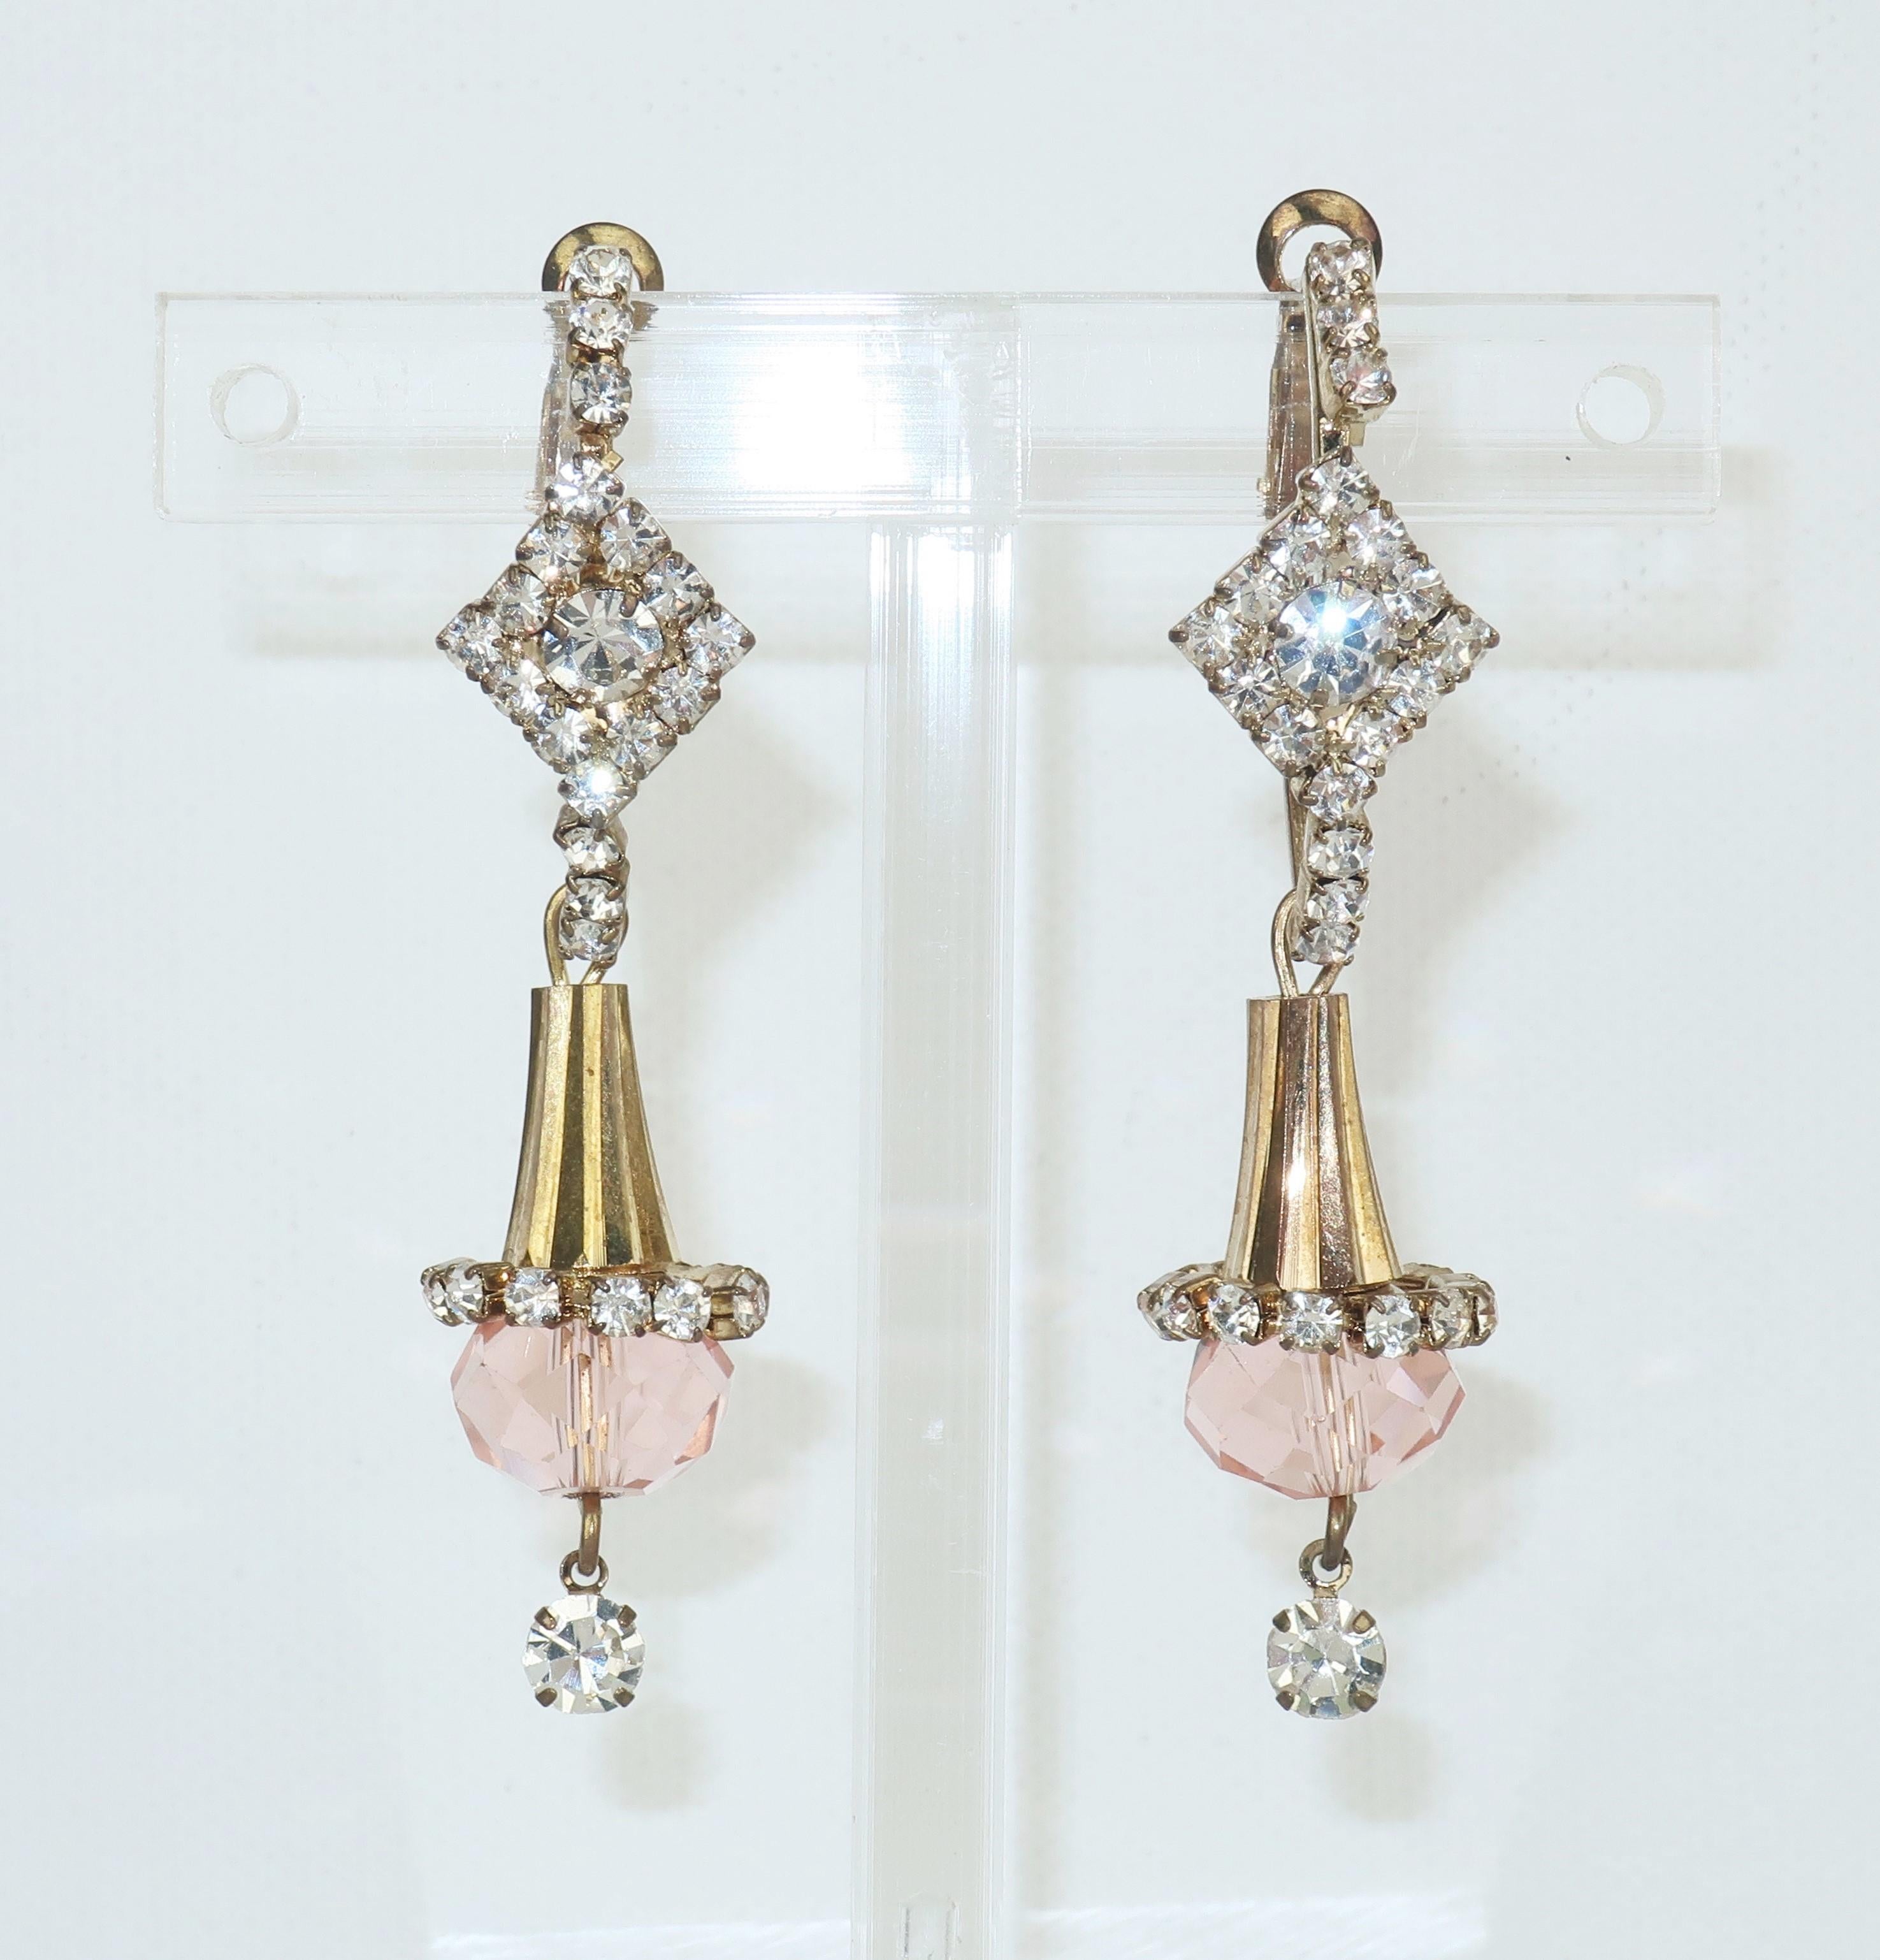 Pretty in pink!  Delicate and lovely 1960's earrings with a Belle Époque style in a gold tone metal with rhinestone embellishments and a pale pink faceted crystal drop.  The pierced post hardware features a lever back for easy wear.  No maker's